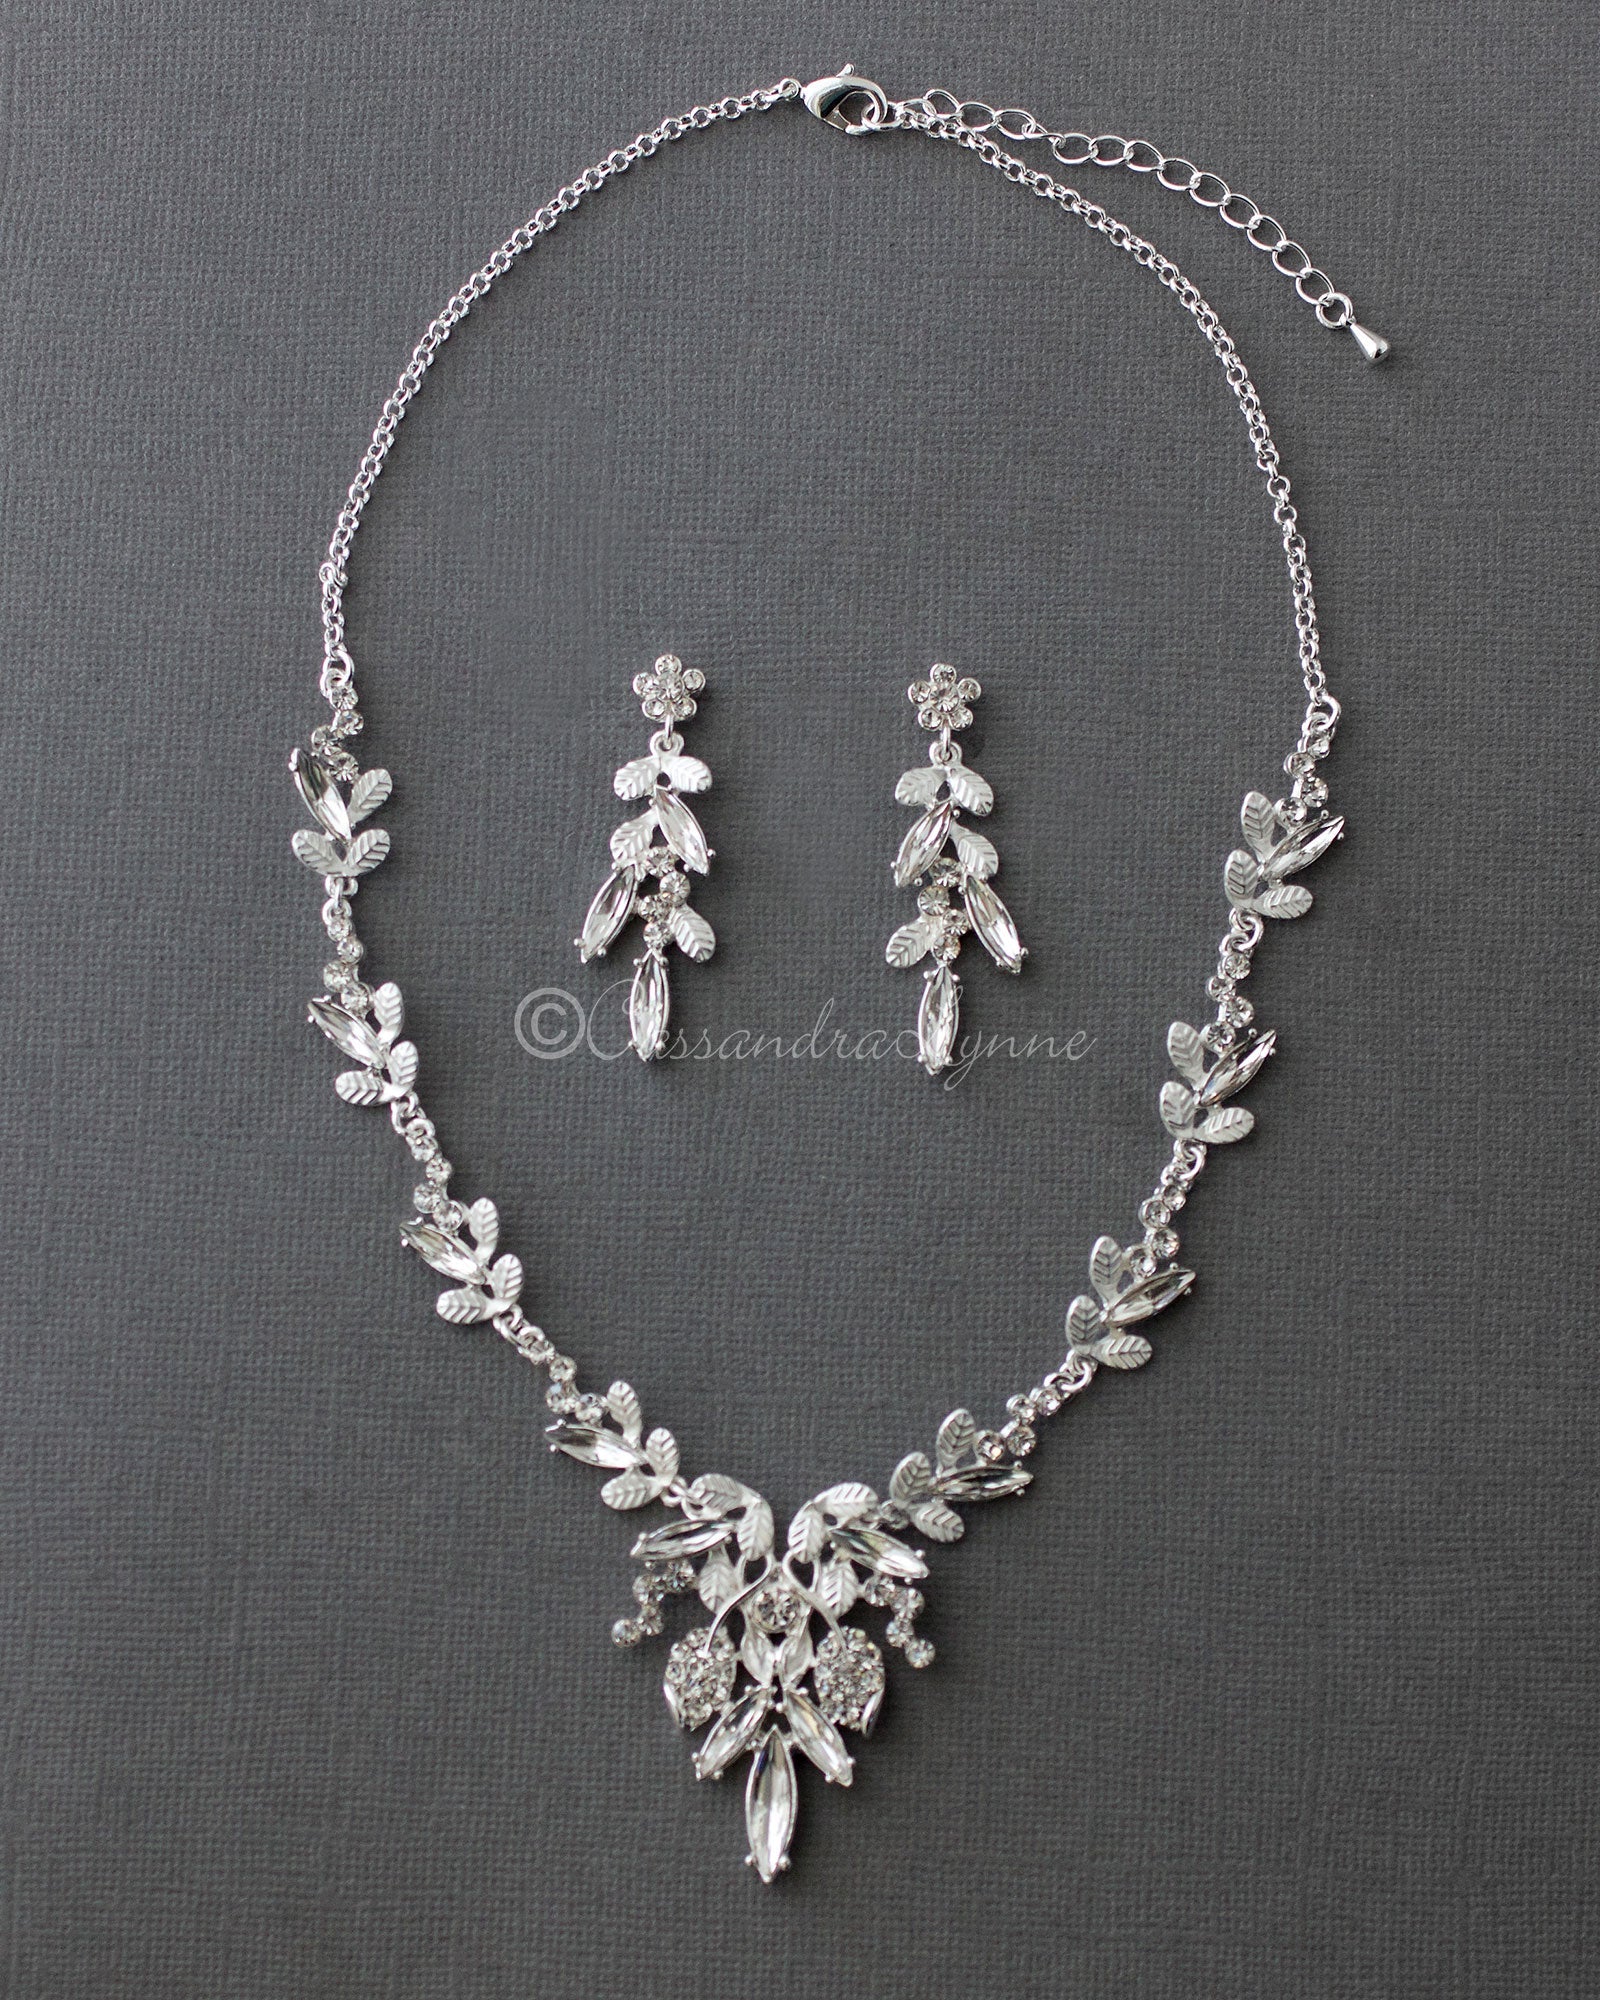 Bridal Necklace of Elongated Crystals Silver